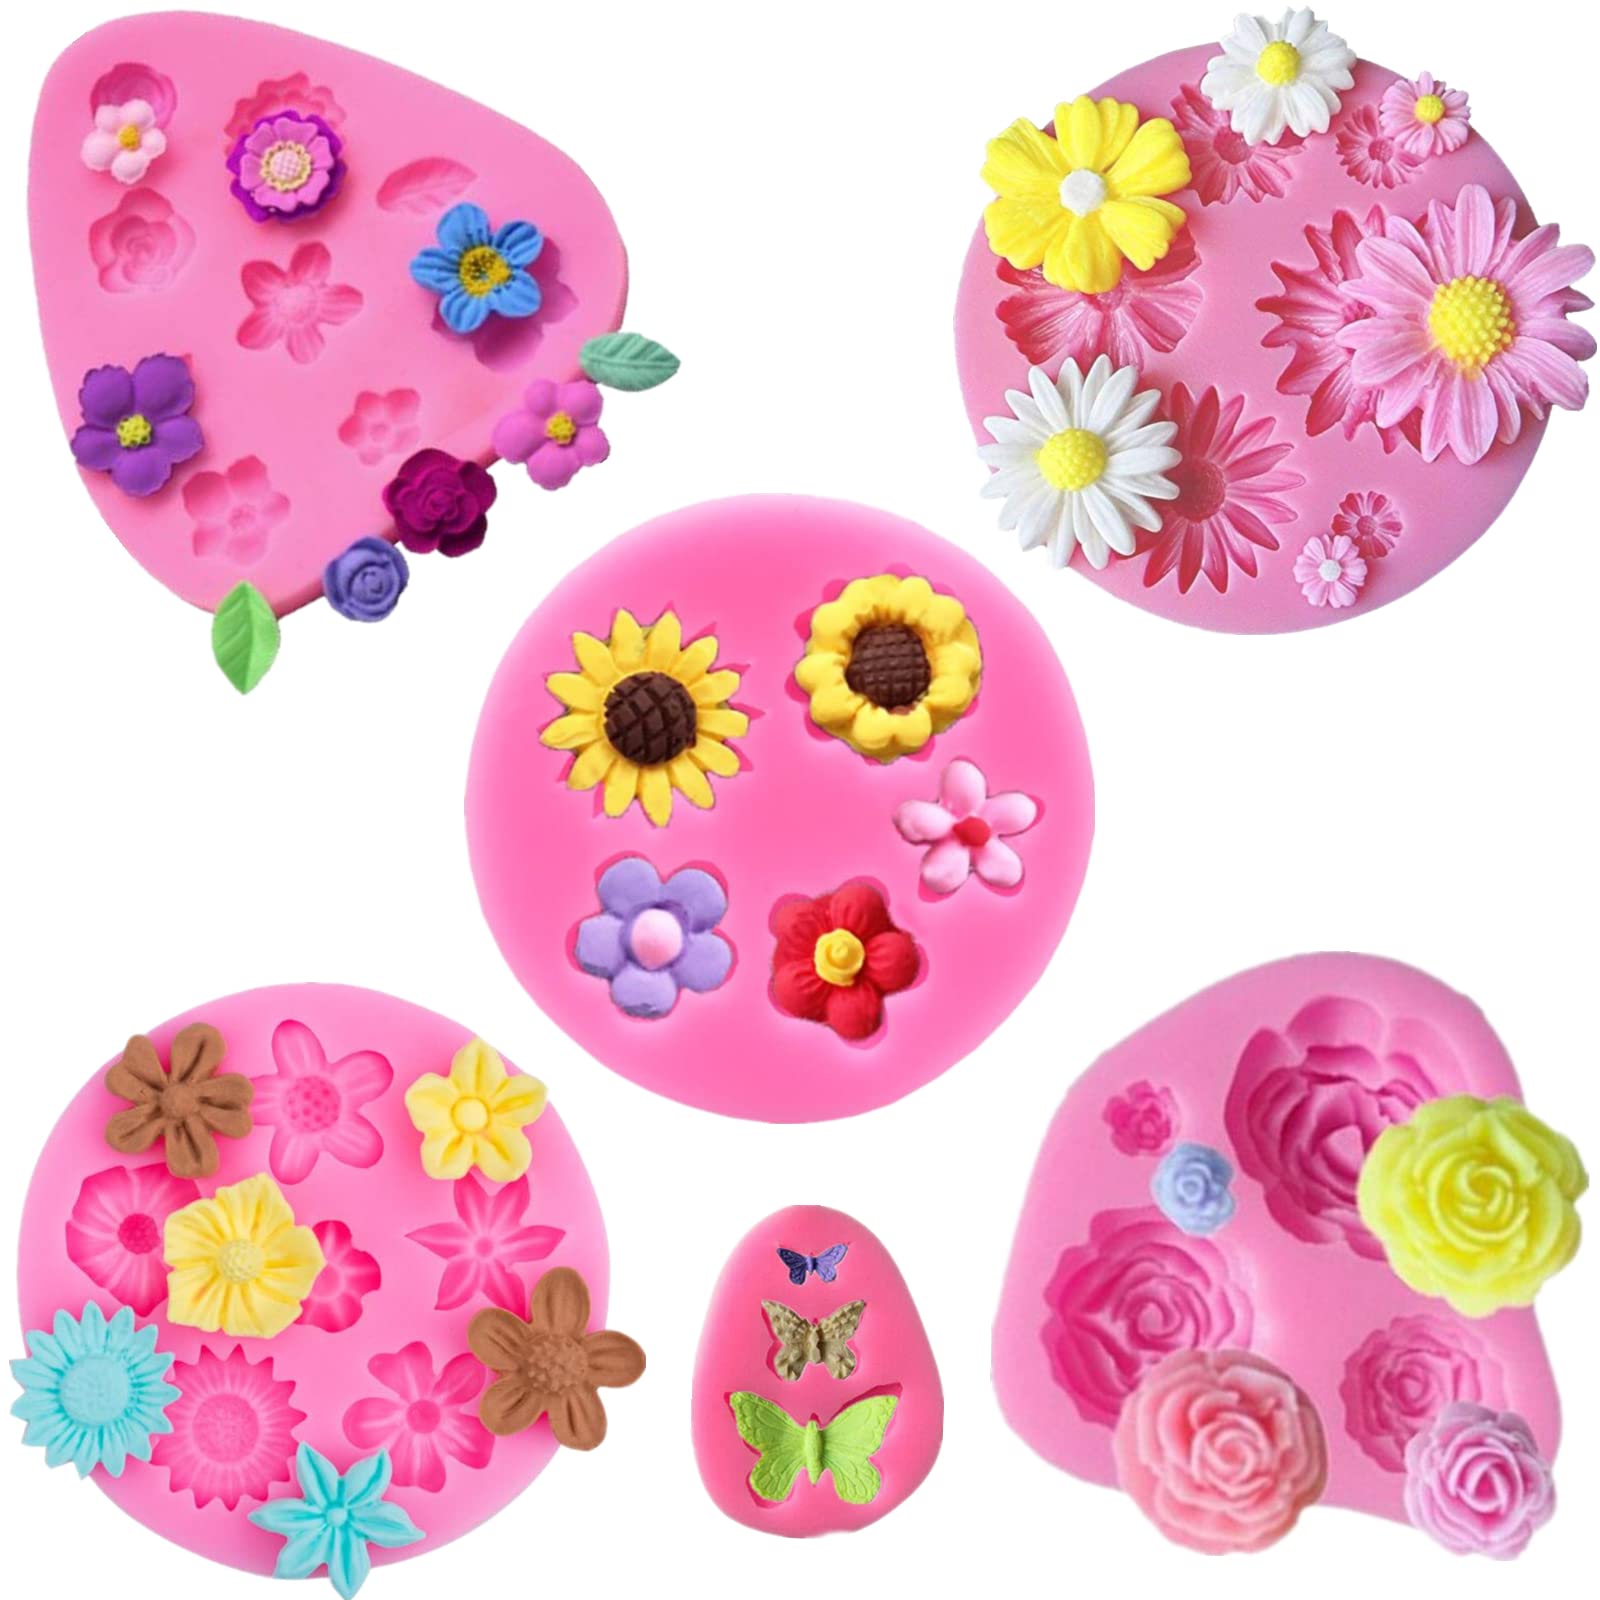 2 Pcs Butterfly Cake Mold Silicone Baking Molds Non-Stick